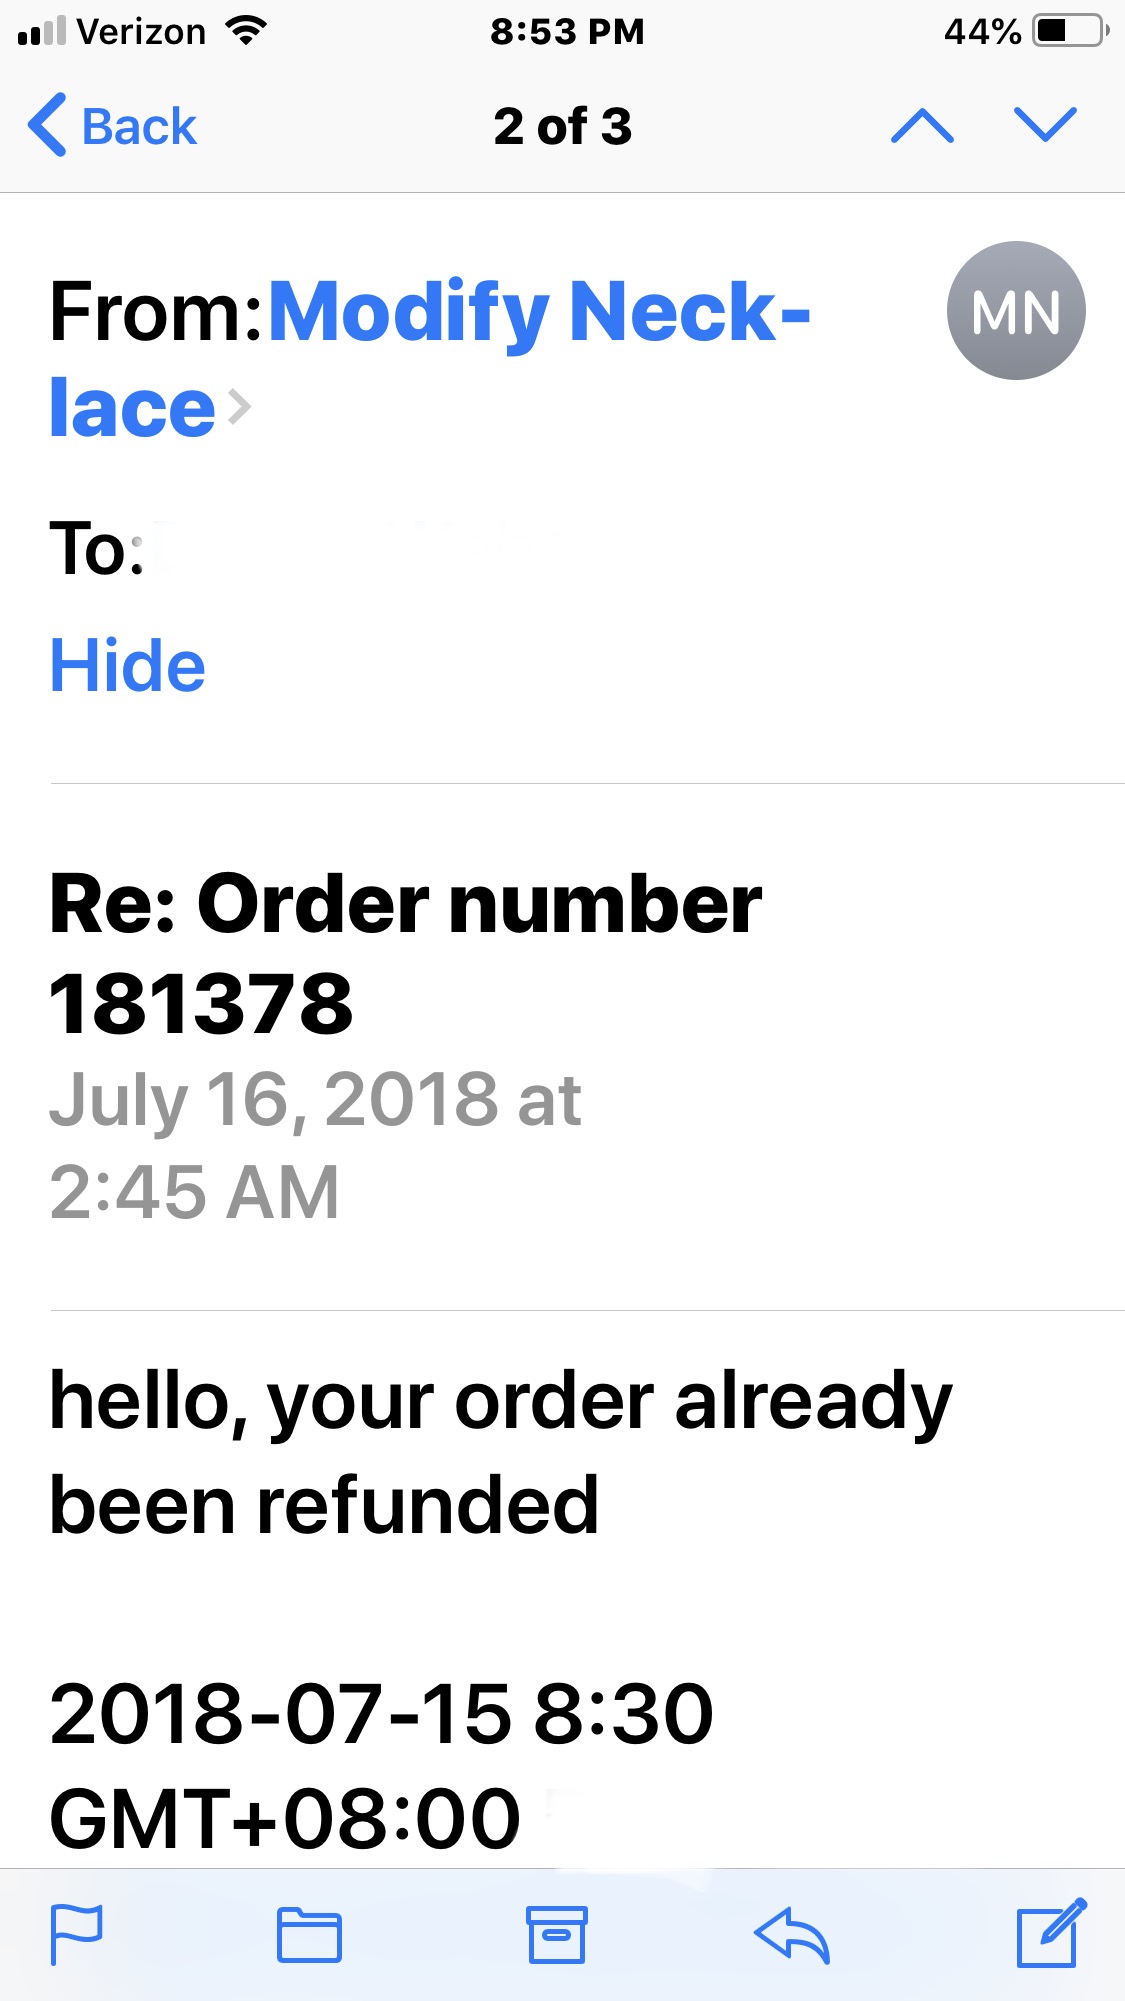 Was told over 30 days ago by seller I was refunded